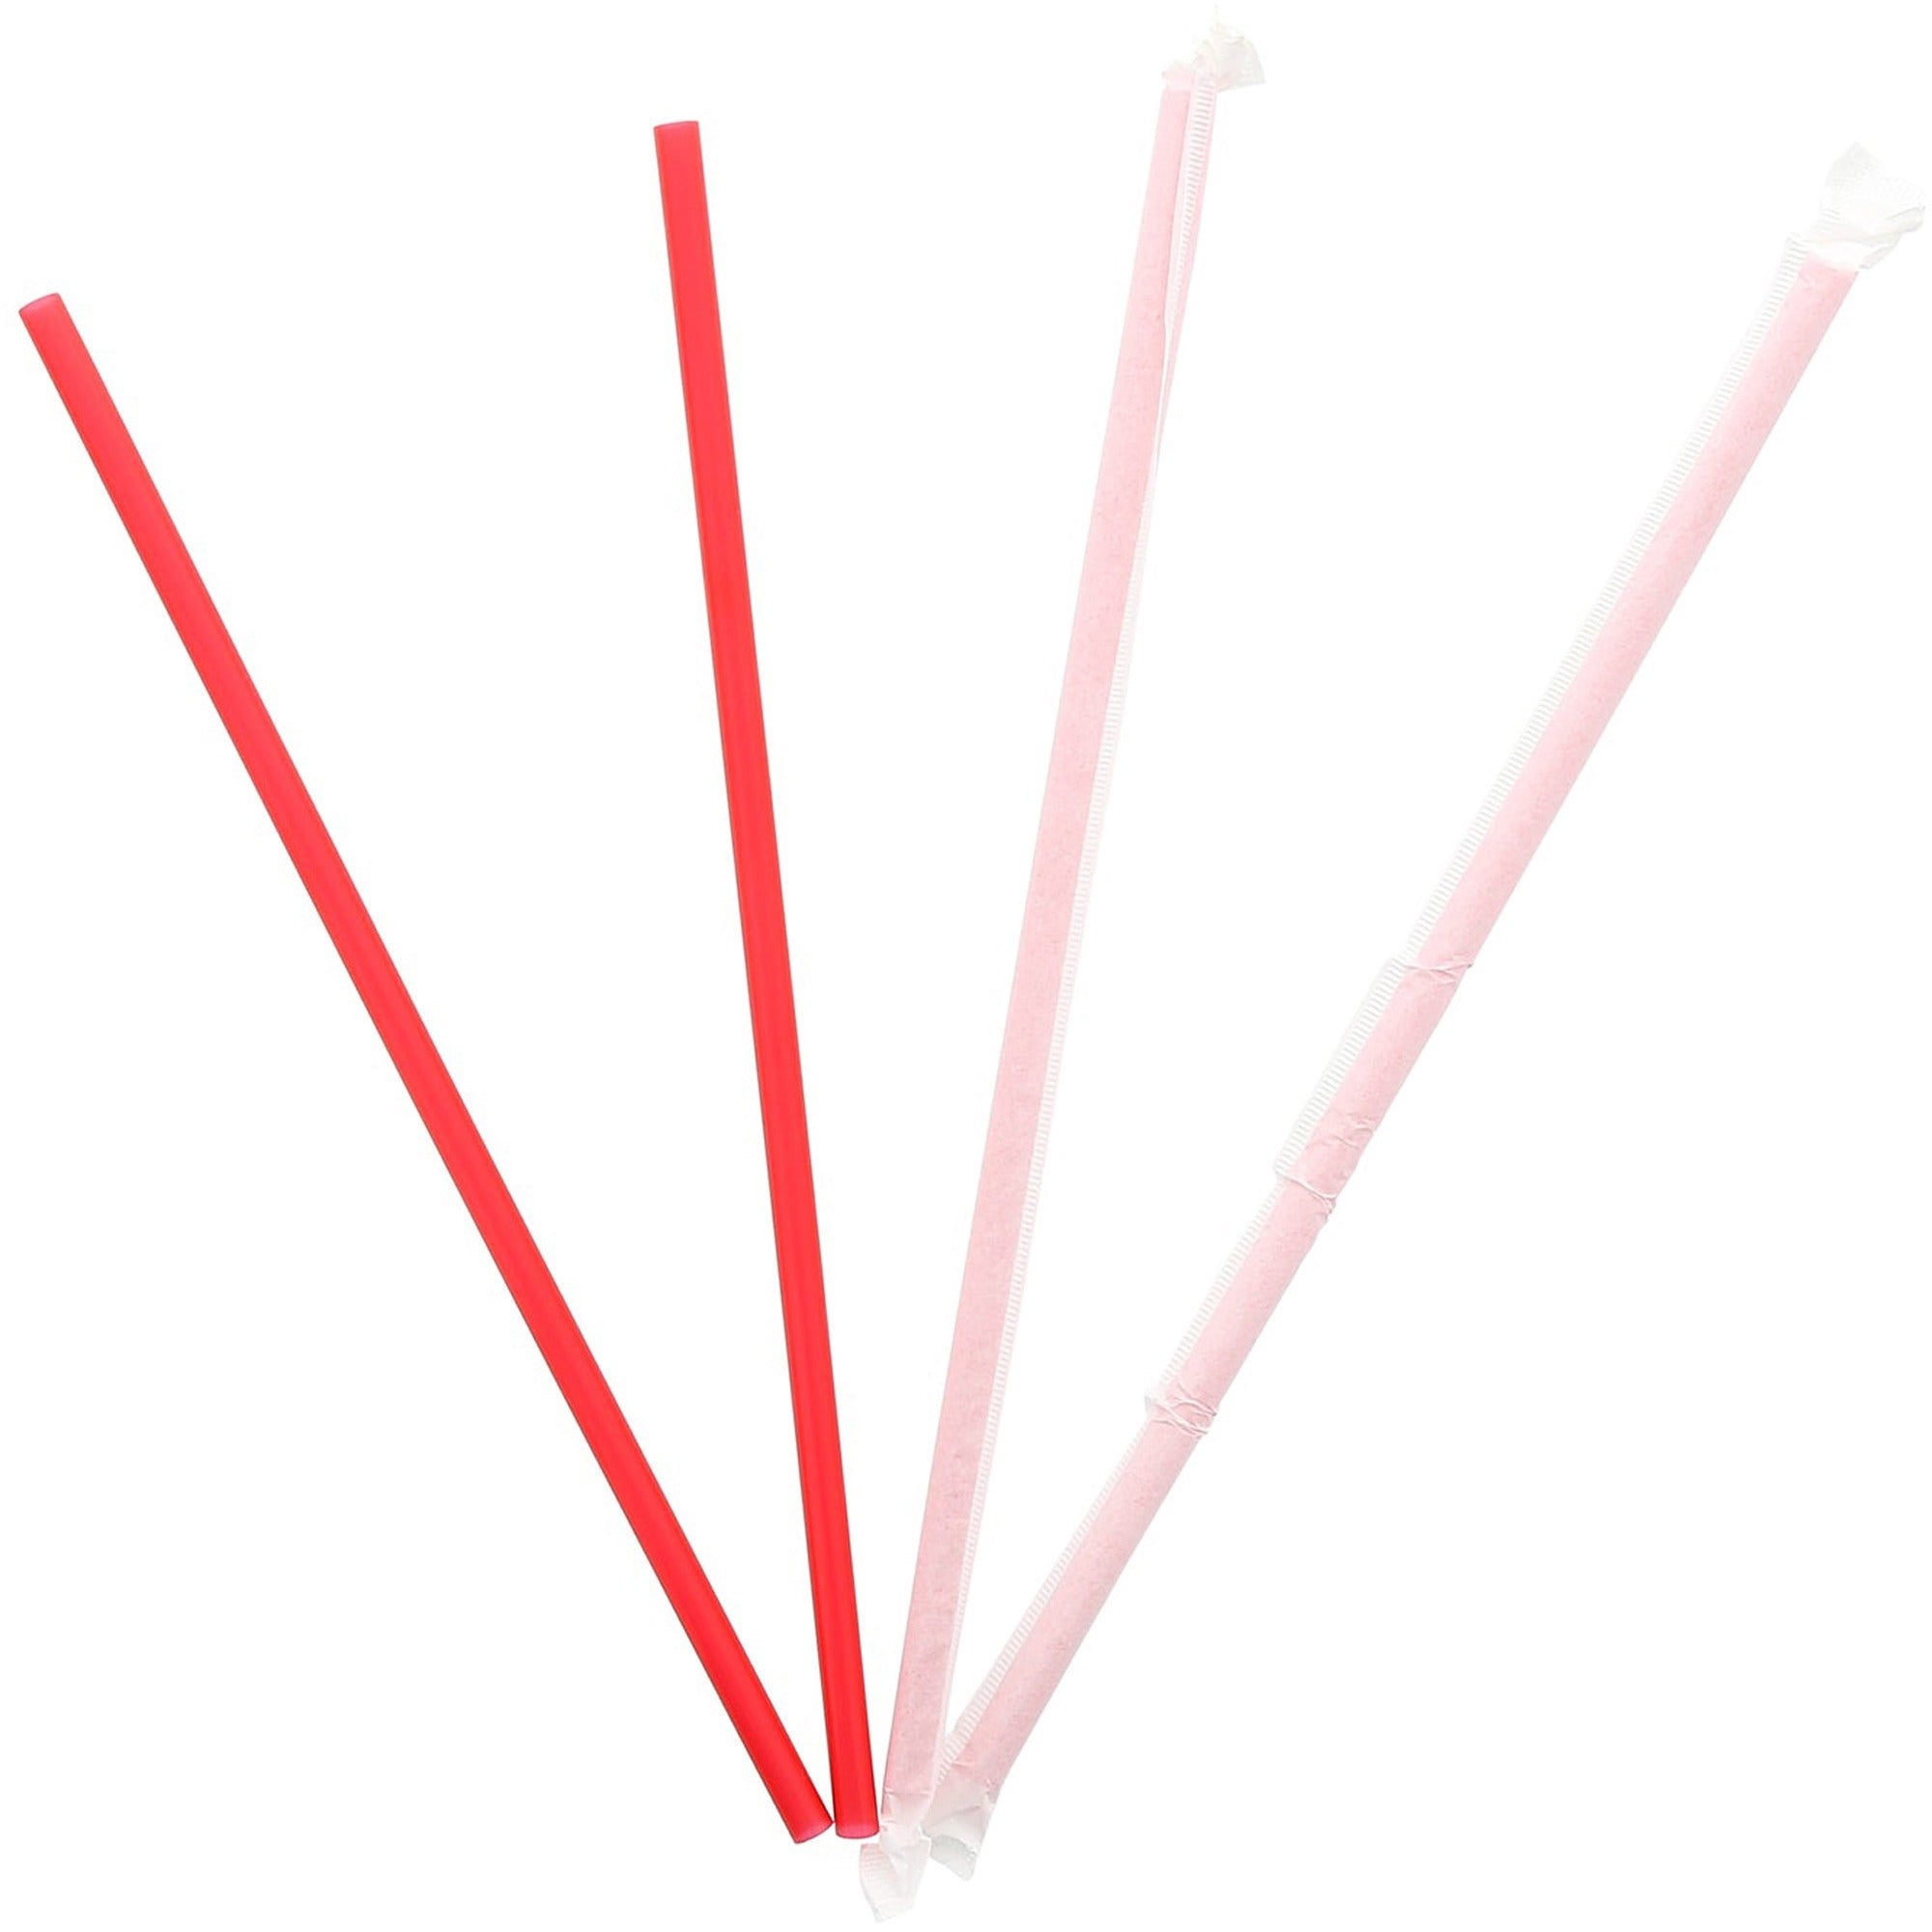 banyan-giant-red-straws-wrapped-103-length-1200-carton-red_egs198200 - 1